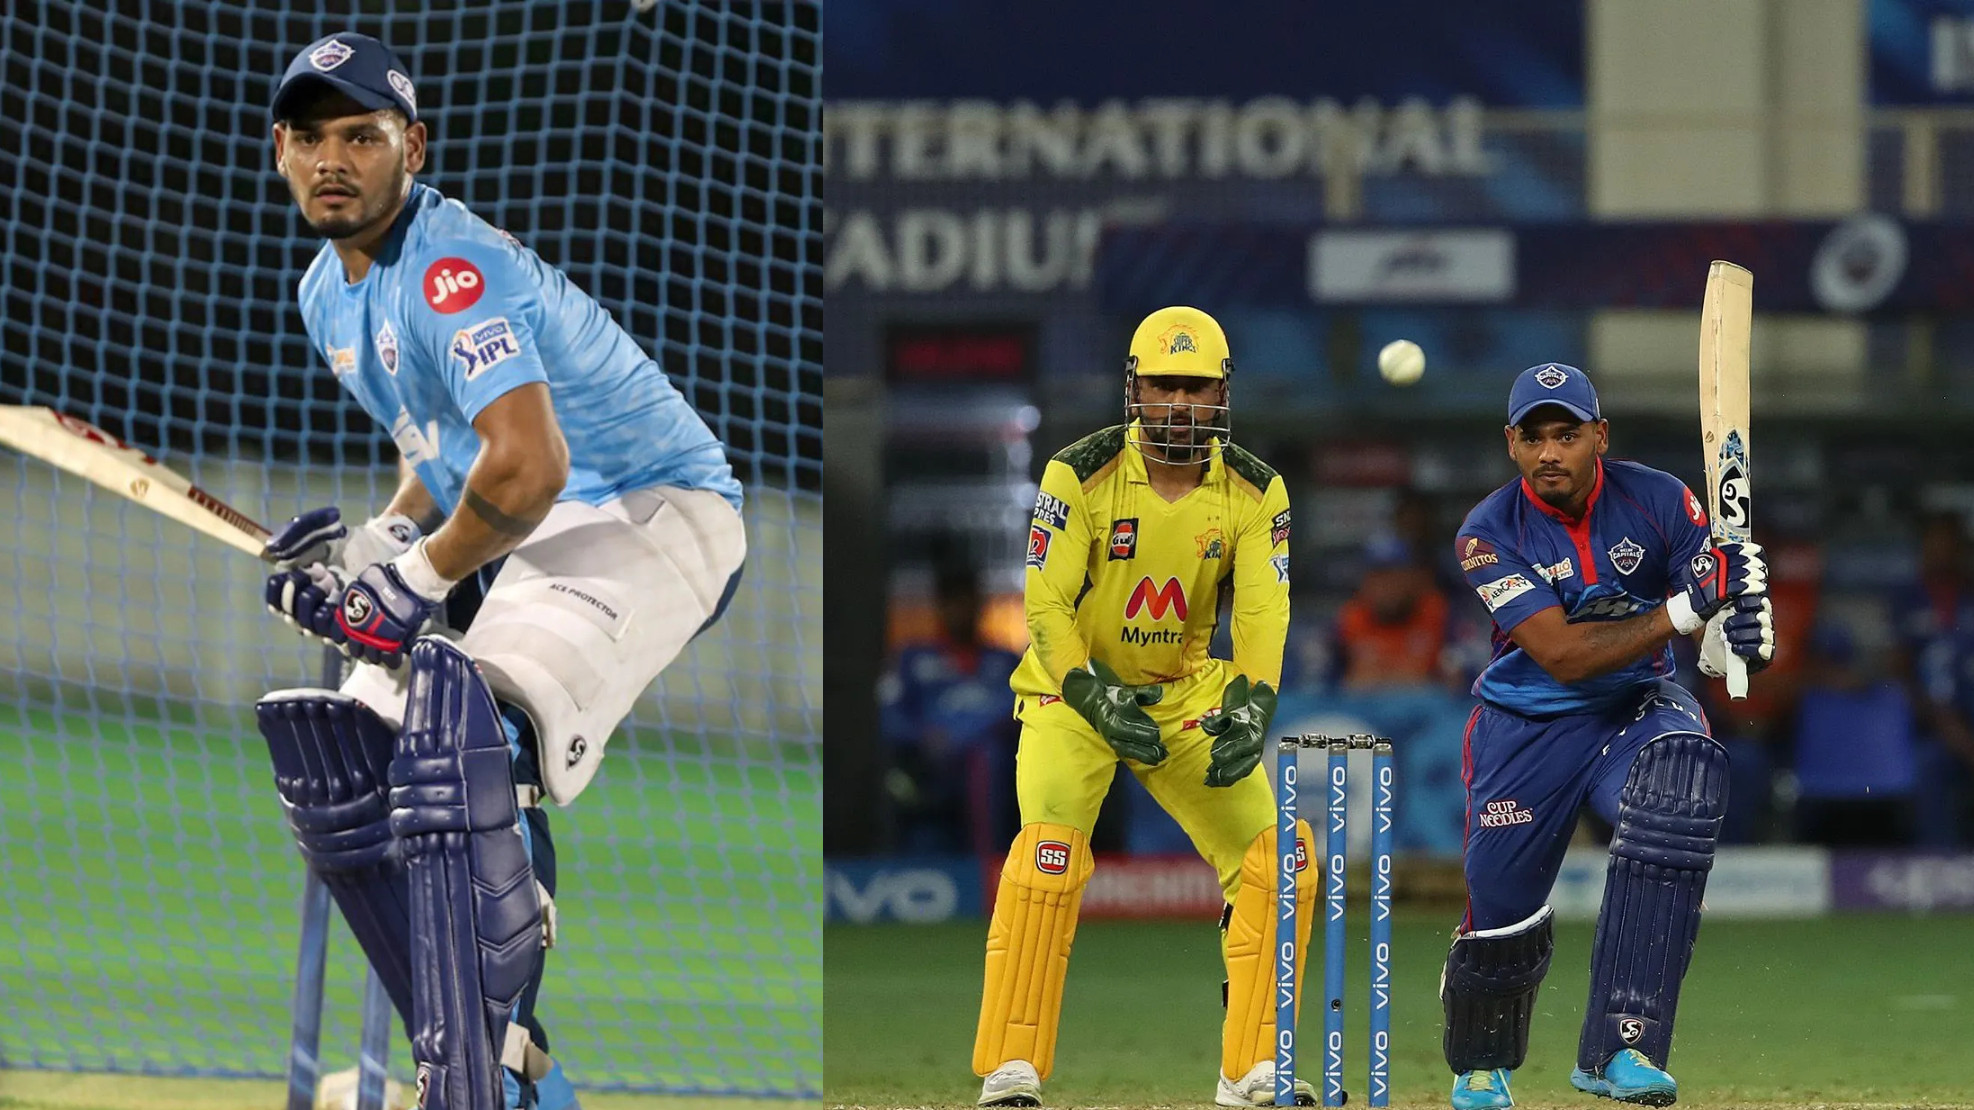 IPL 2021: Ripal Patel says playing against MS Dhoni was a ‘fan boy’ moment for him